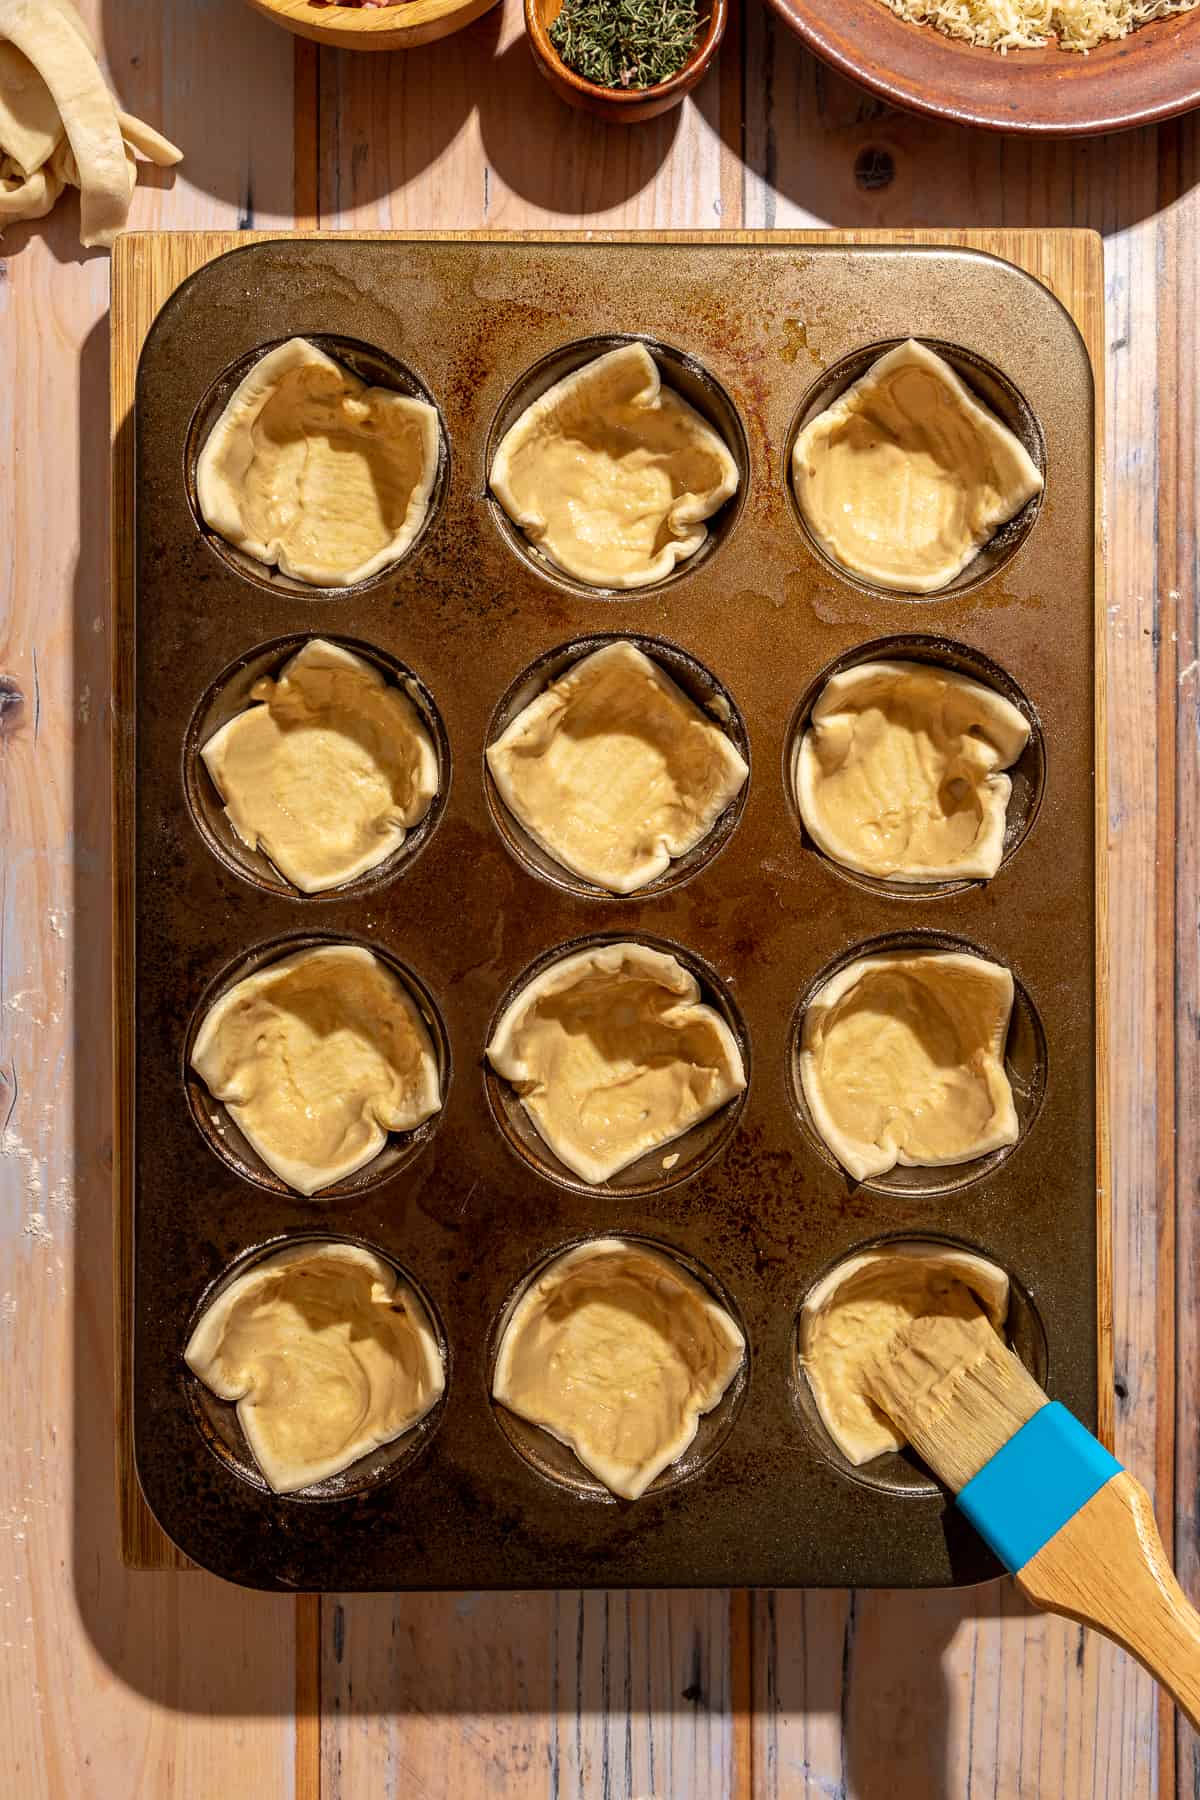 Puff pastry in muffin tin openings. Patry brush with Dijon mustard being brushed onto puff pastry.